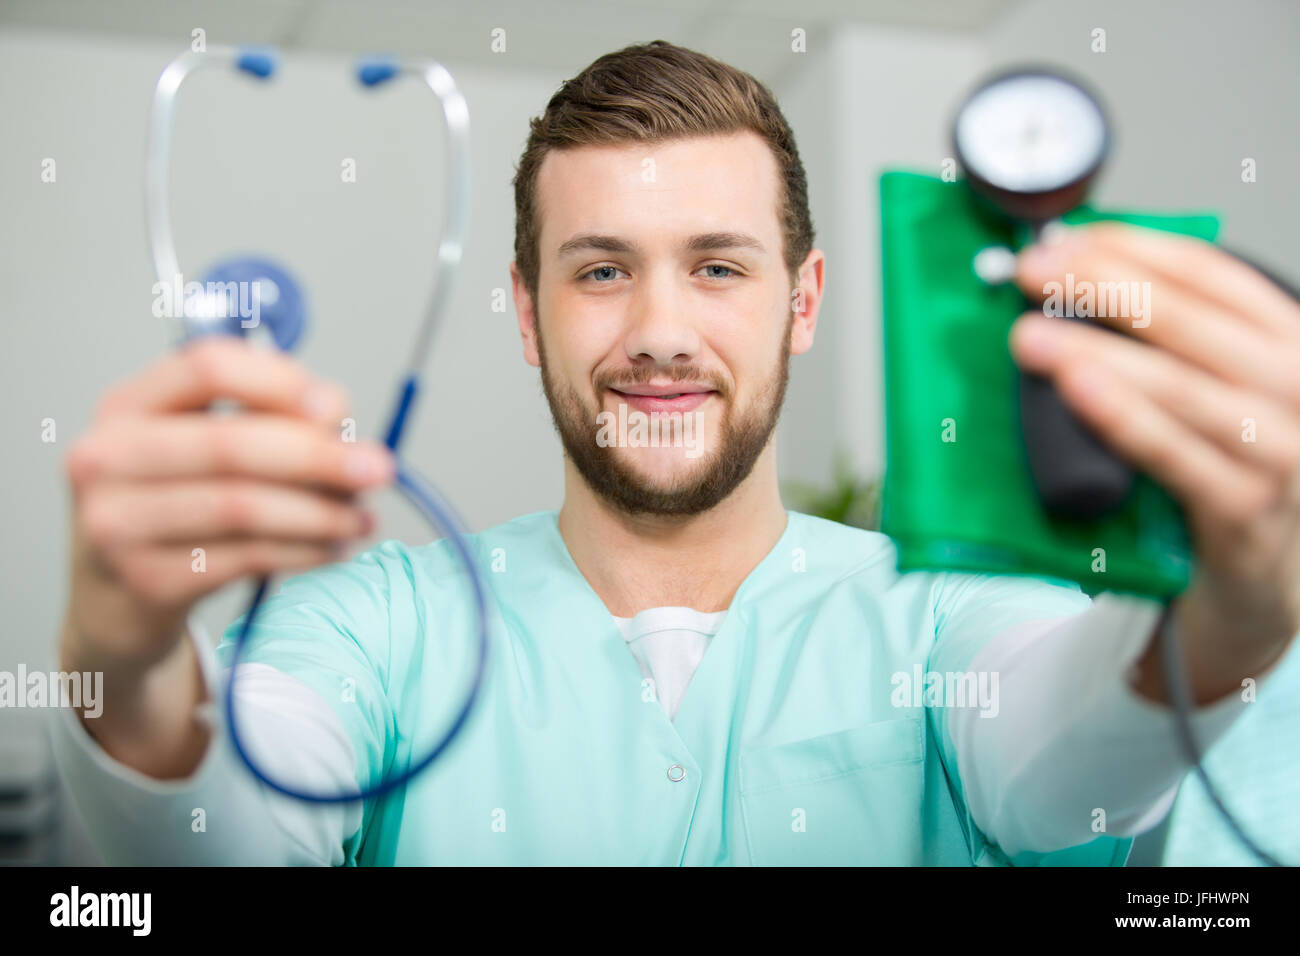 medic showing stethoscope and blood pressure testing kit Stock Photo